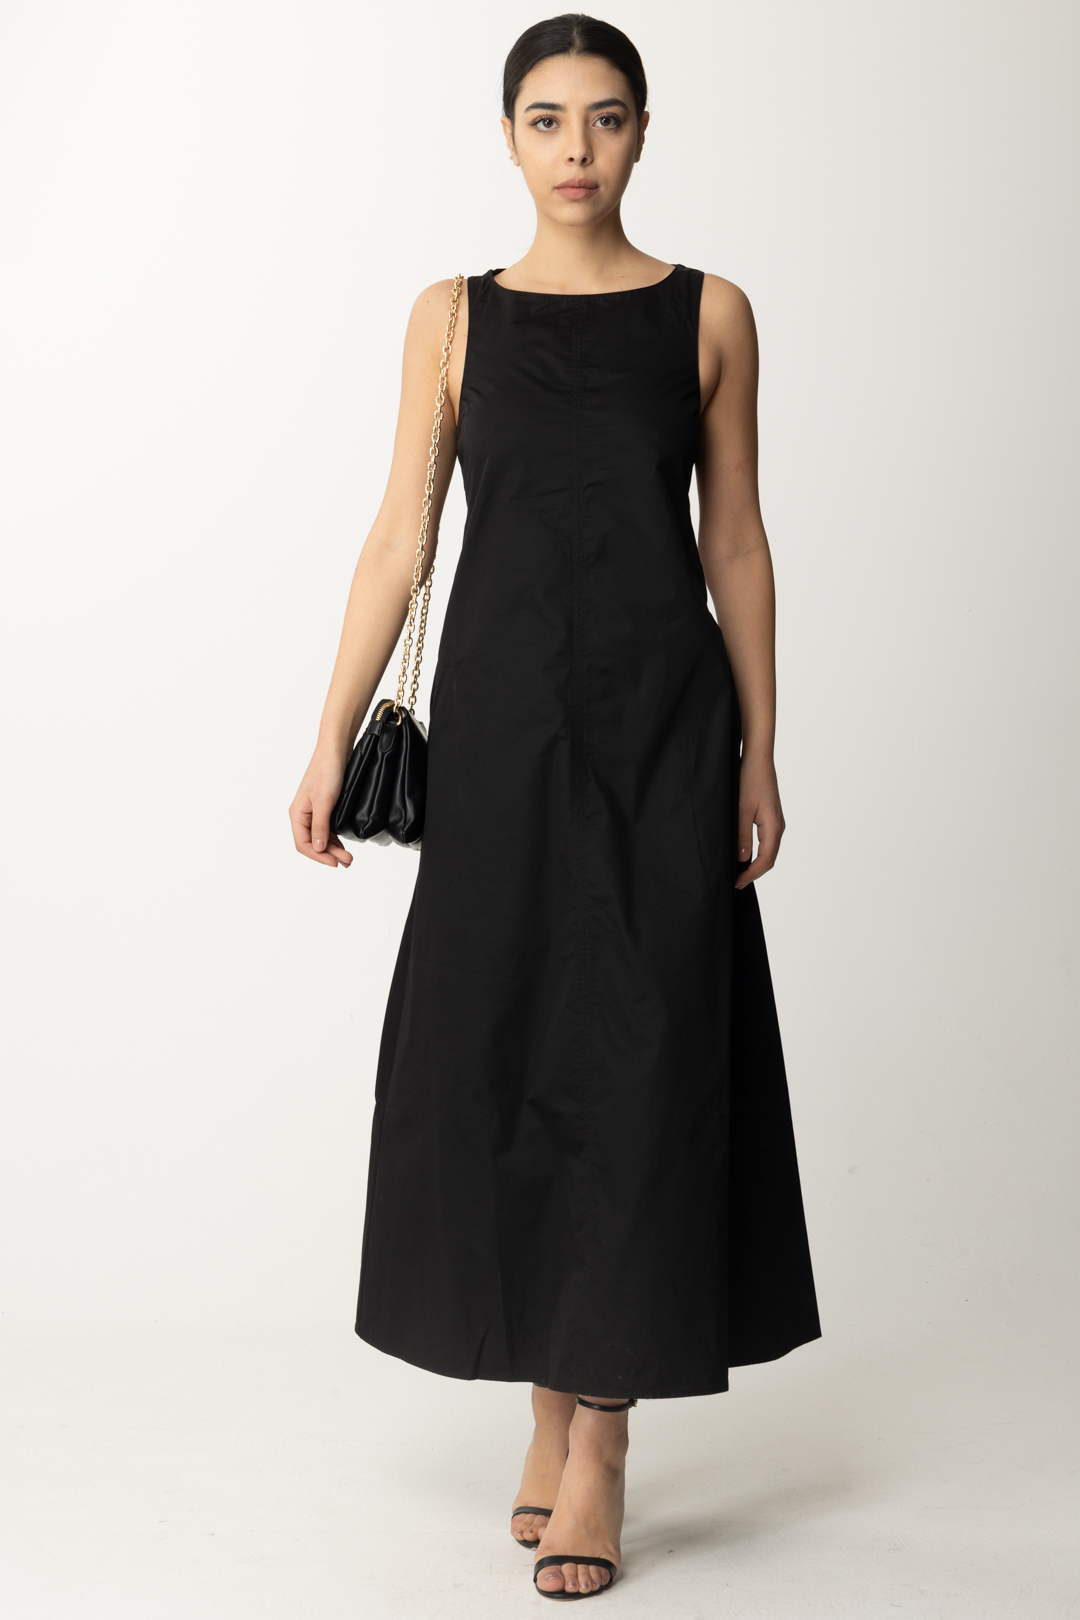 Preview: Replay Flared dress with cut-out at the back Black